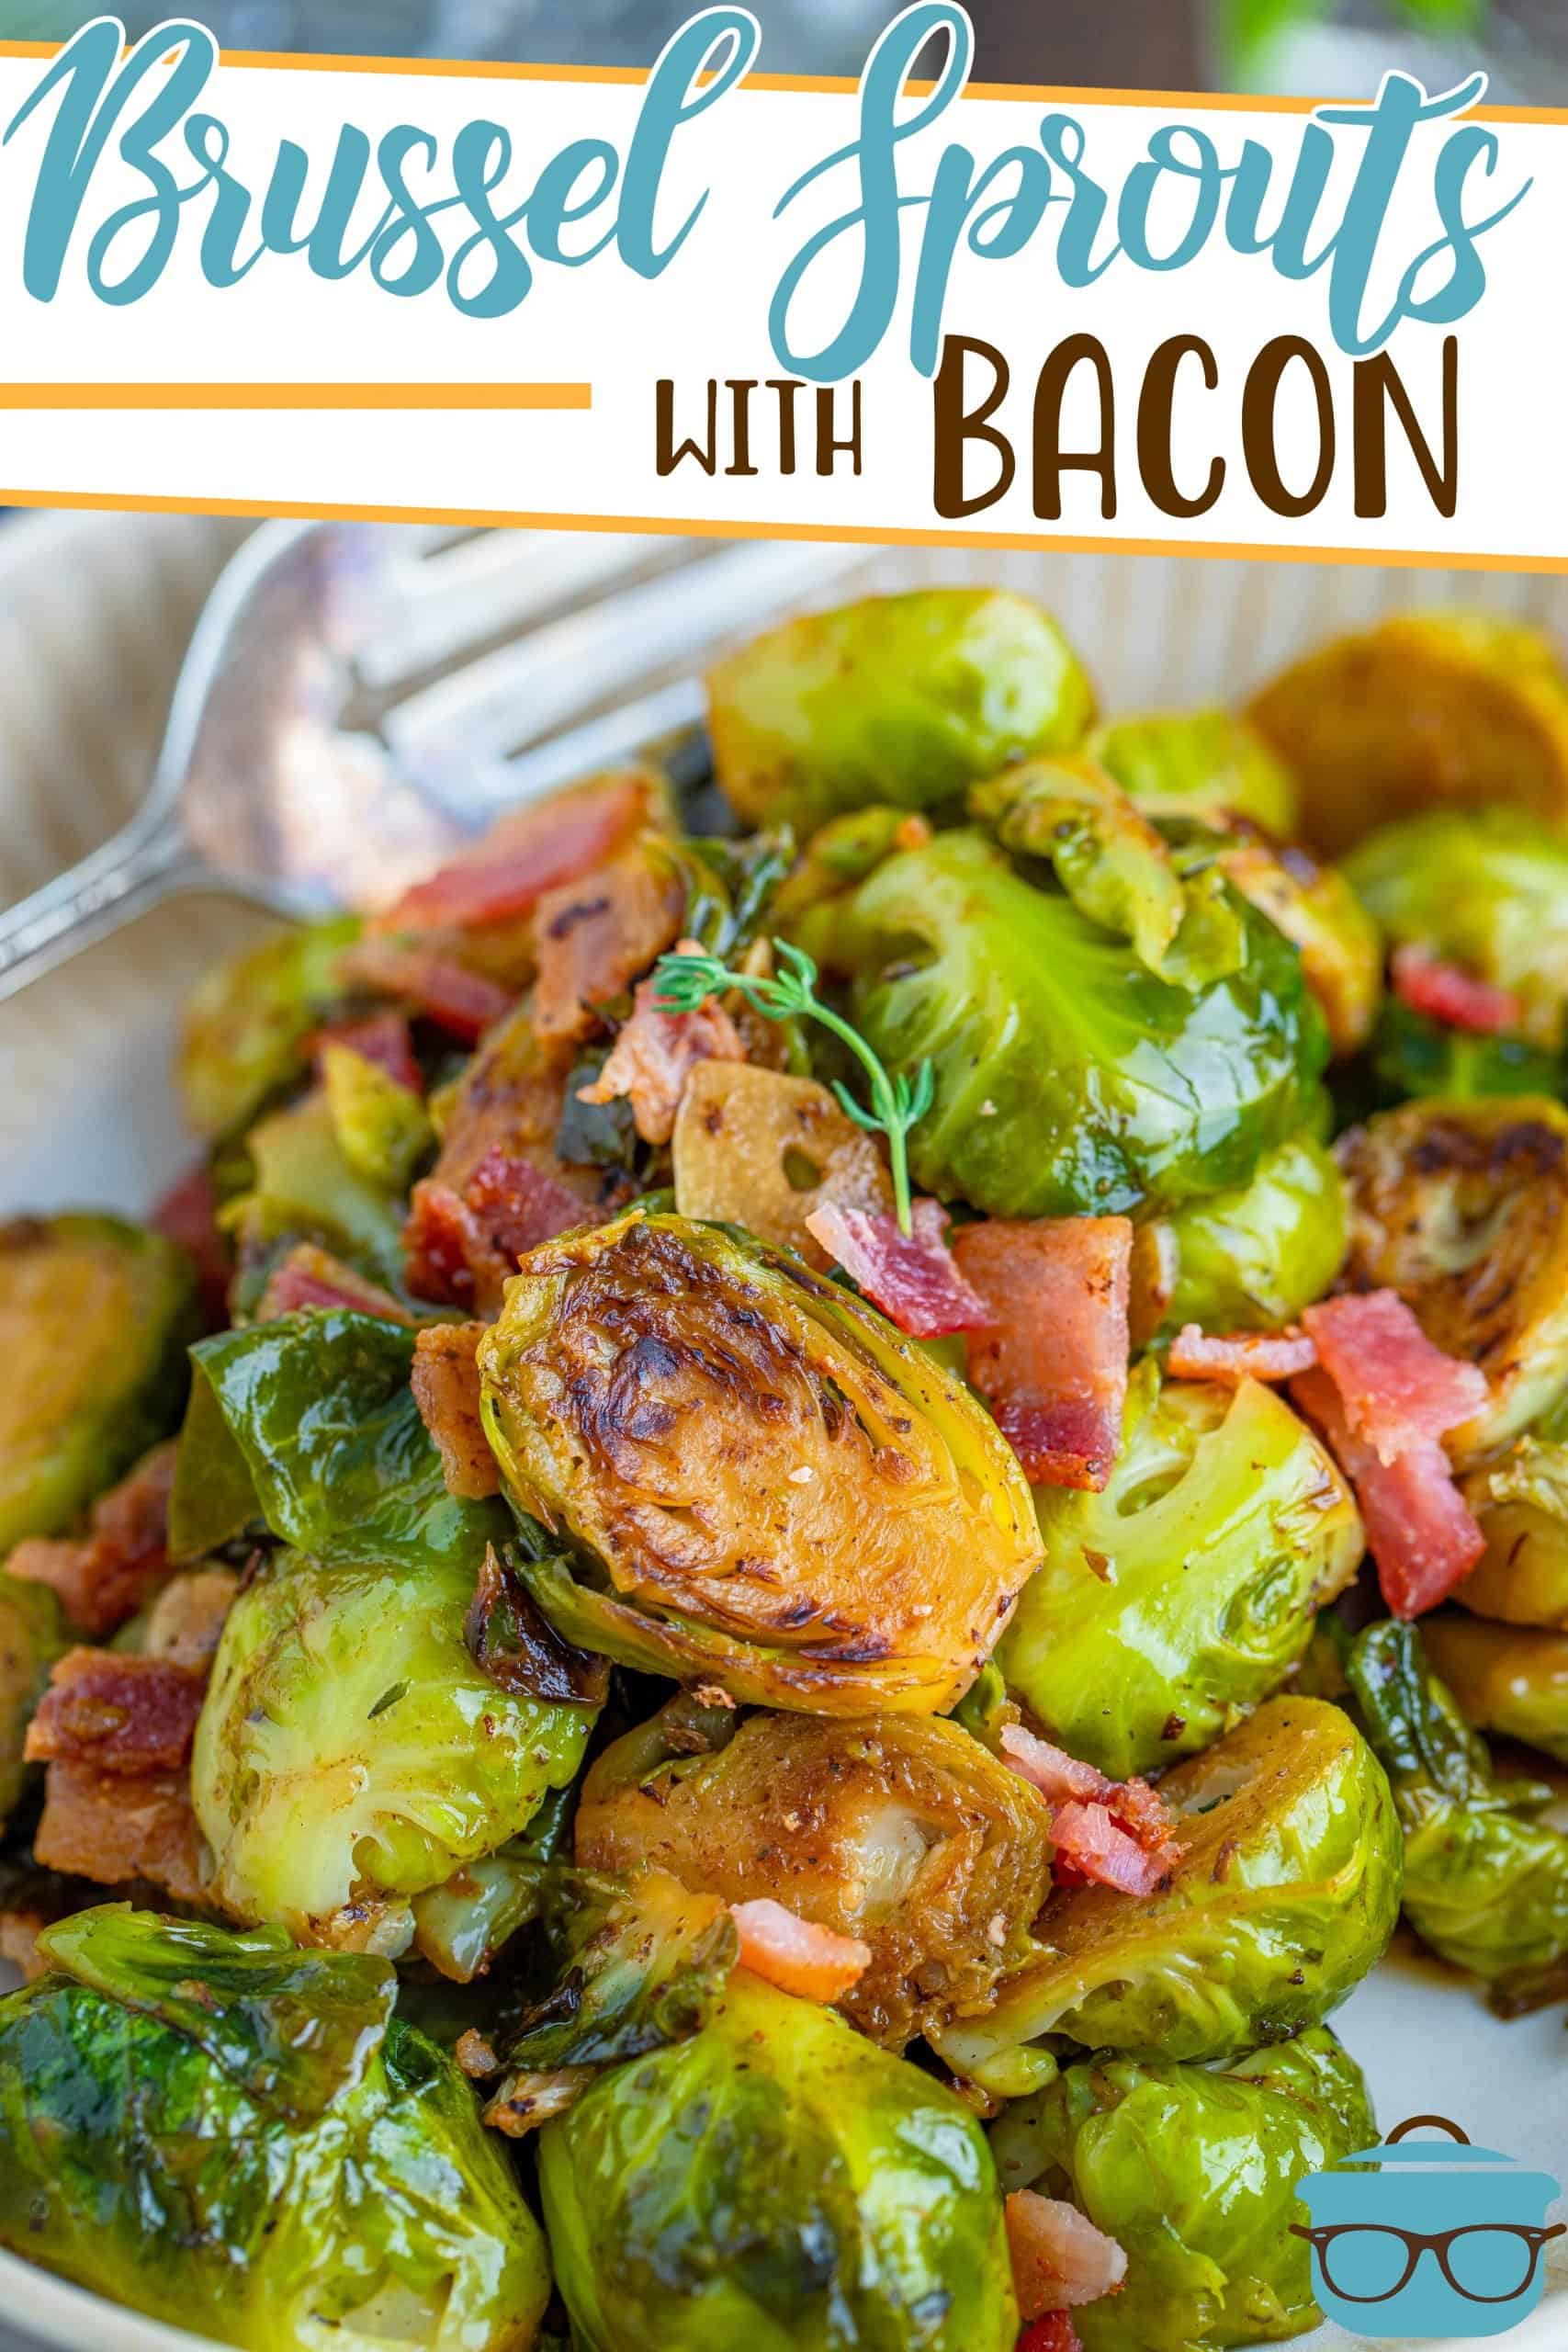 Stovetop Brussel Sprouts with Bacon recipe from The Country Cook, shown on a plate with a serving fork on the side.